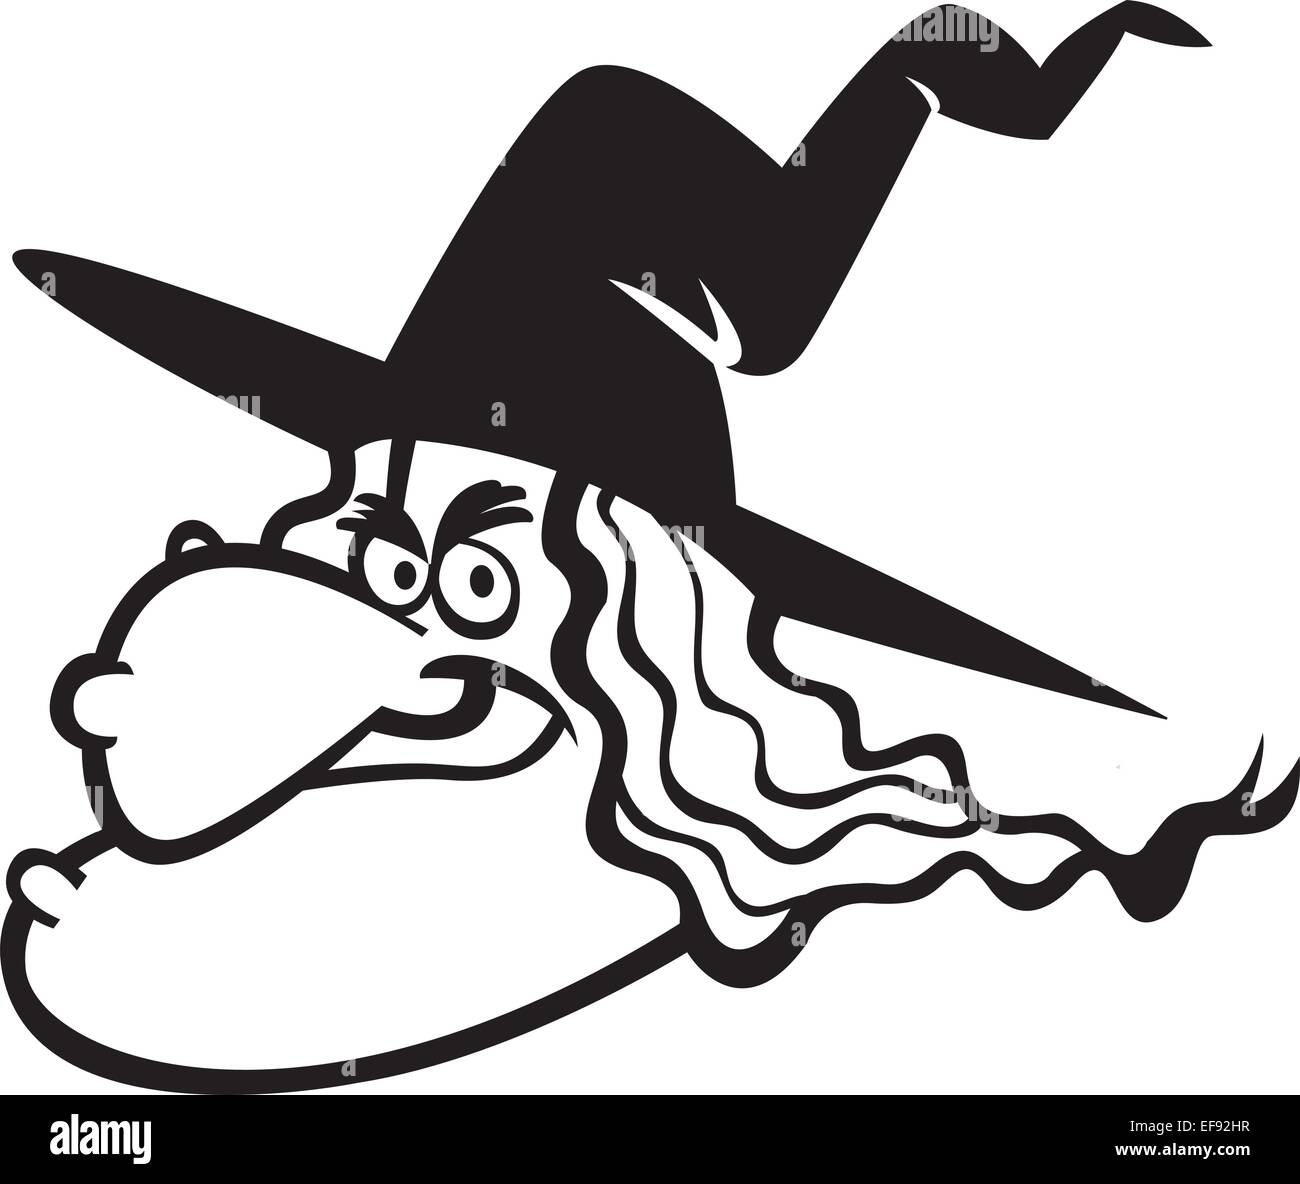 witch face clipart black and white